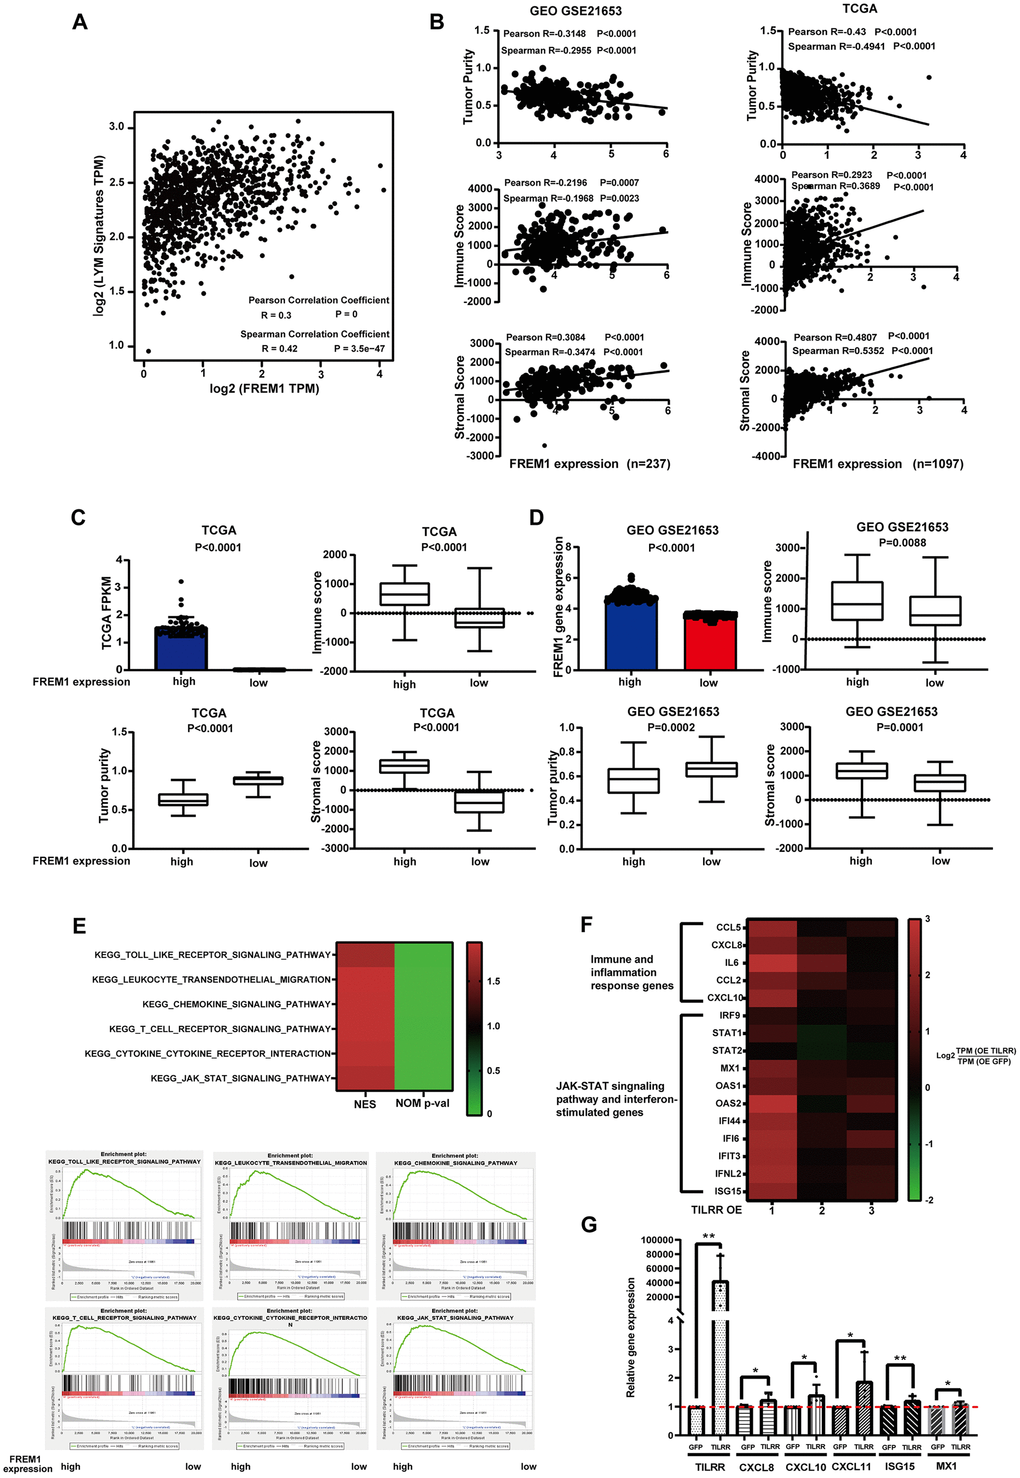 FREM1 mRNA levels were associated with tumor infiltrating lymphocytes. (A) The average expression of the LYM metagene signature [PTPRC (CD45), CD53, LCP2 (SLP-76), LAPTM5, DOCK2, IL10RA, CYBB and CD48, ITGB2 (LFA-1) and EVI2B] in breast cancers from the TCGA database relative to the FREM1 mRNA level. (B–D) Tumor purity, immune score and stromal score were analyzed using the ESTIMATE algorithm from GEO (N = 237) and TCGA (N = 1097) database. (E) GSEA analysis was used to demonstrate the correlation between FREM1 expression and the KEGG enriched pathway. (F) Immune and inflammation response genes, the JAK-STAT signaling pathway and interferon-stimulated genes were analyzed by RNA-seq in BT474 cancer cells. (G) CXCL8, CXCL10, CXCL11 and the interferon stimulation genes, ISG15 and MX1, were analyzed by Q-PCR in BT474 cancer cells.